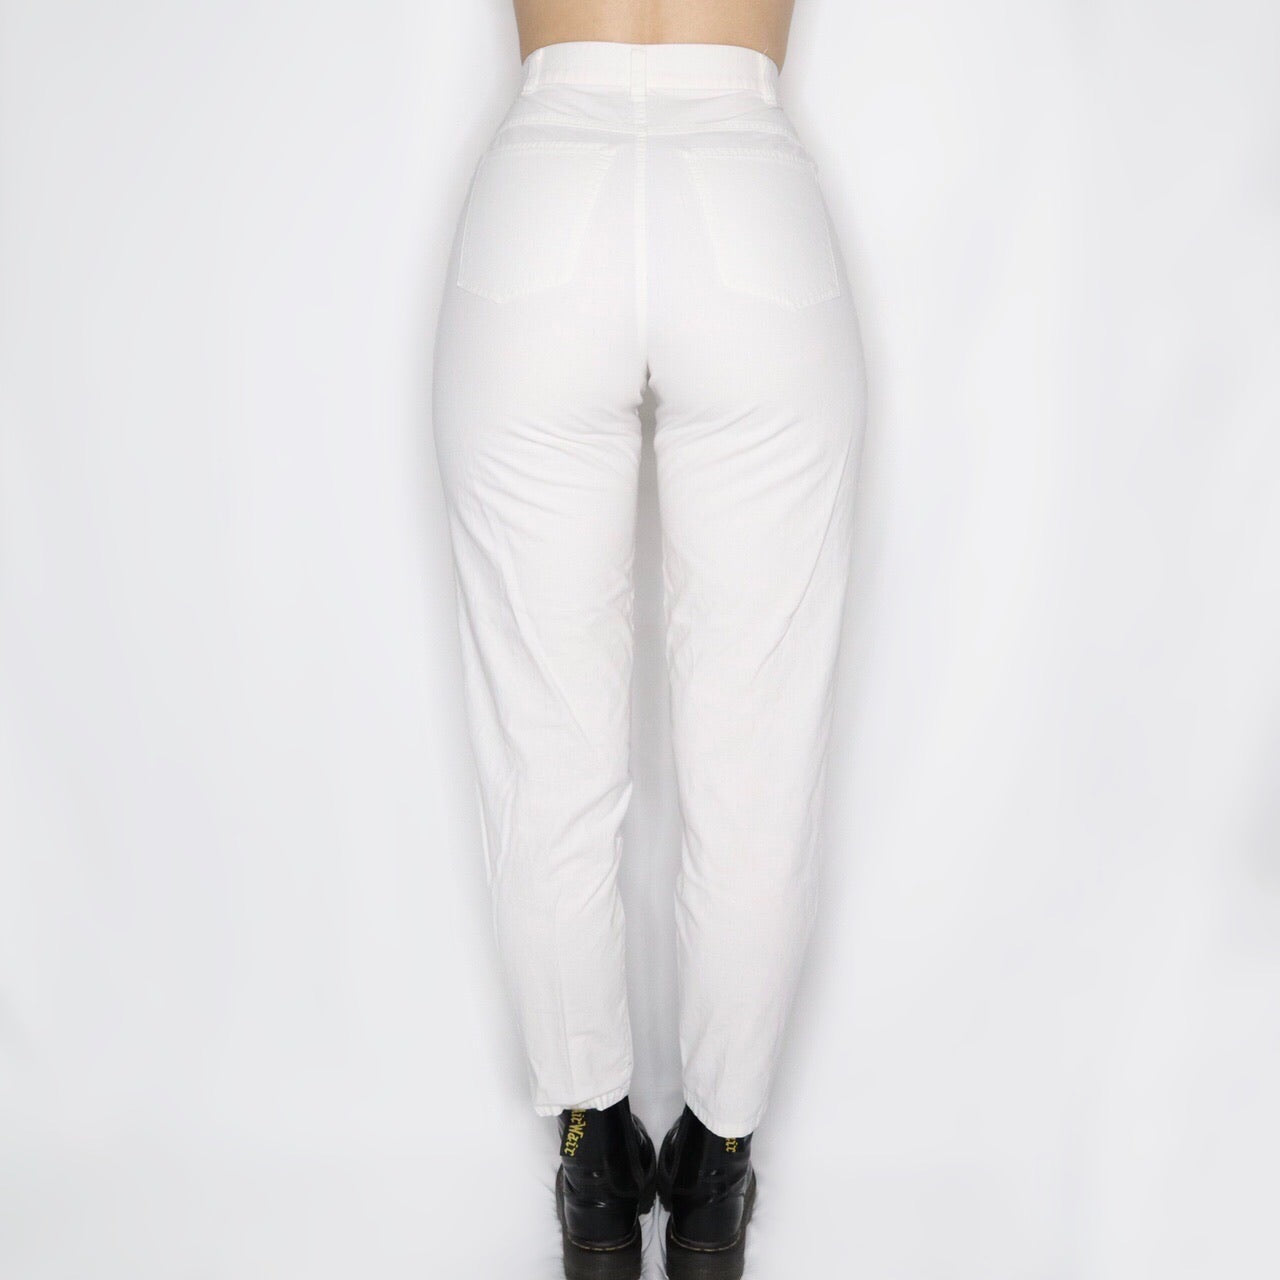 Vintage 90s High Waisted White Pants